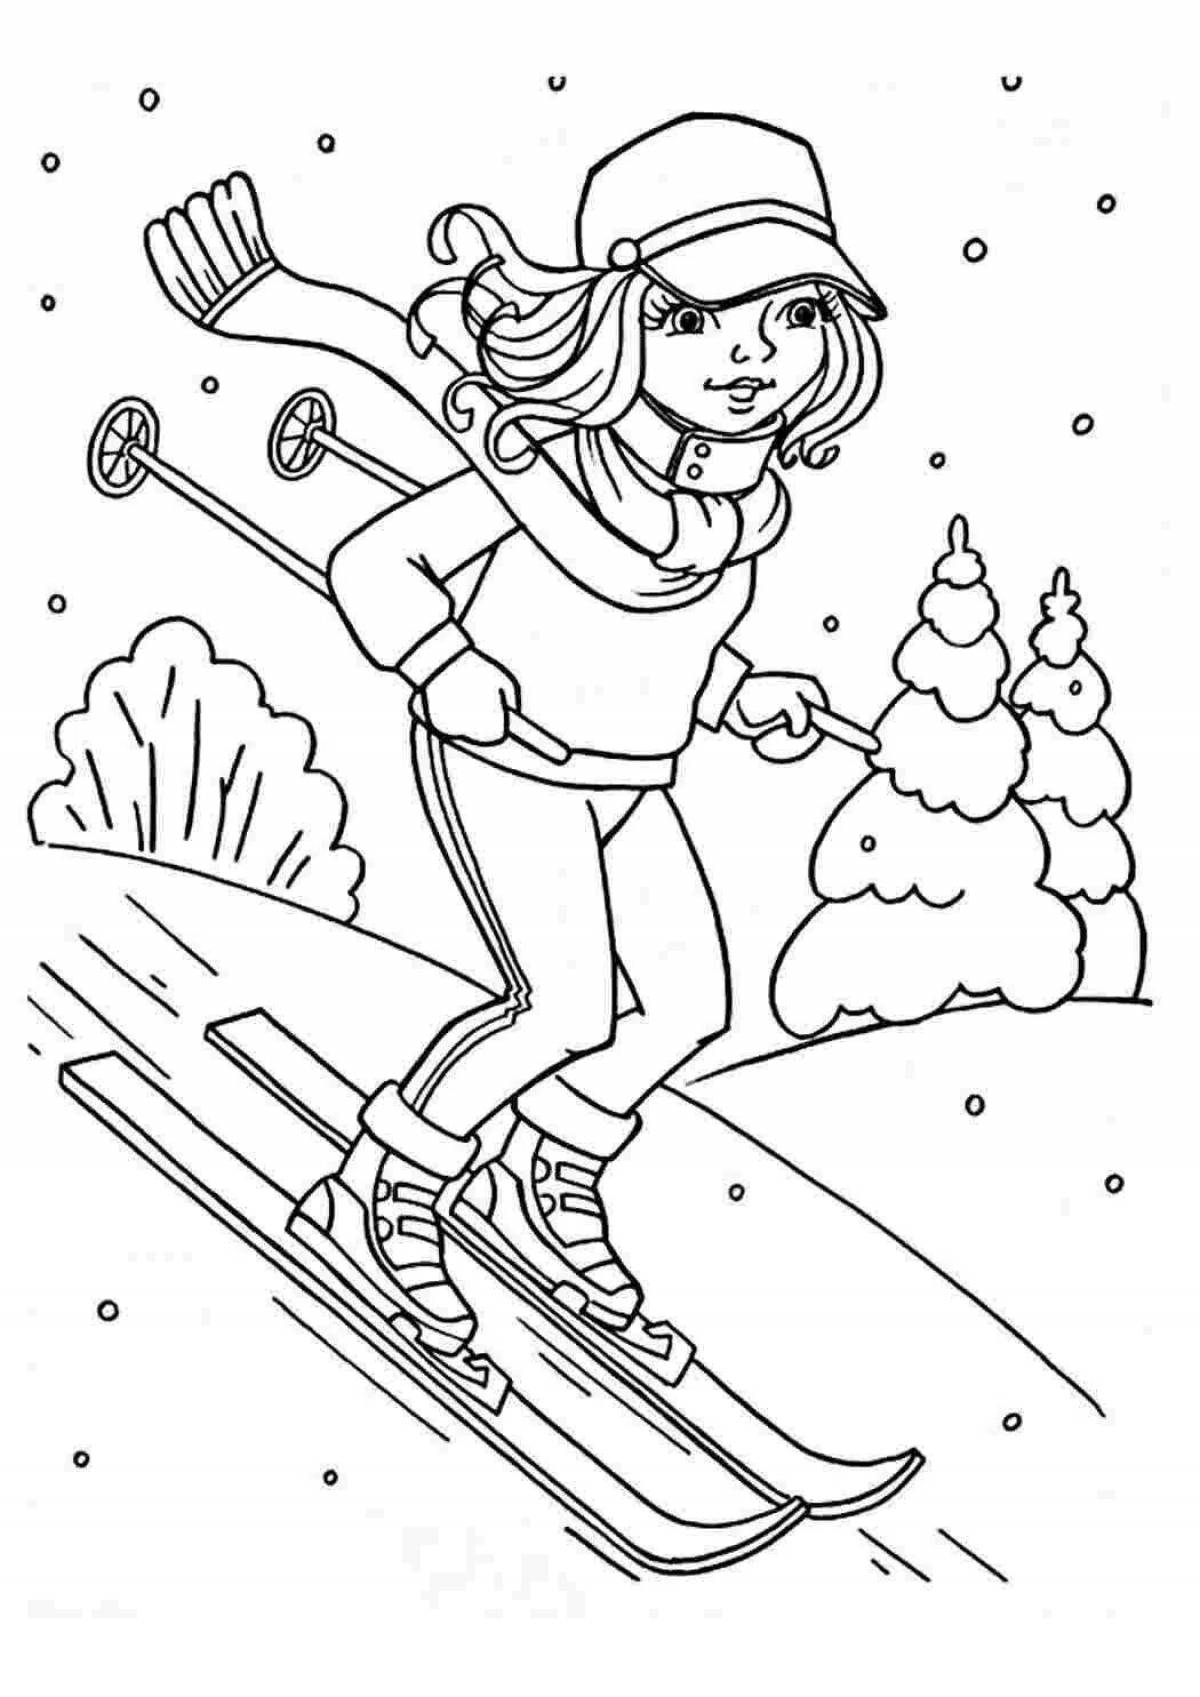 Vibrant coloring for skiing